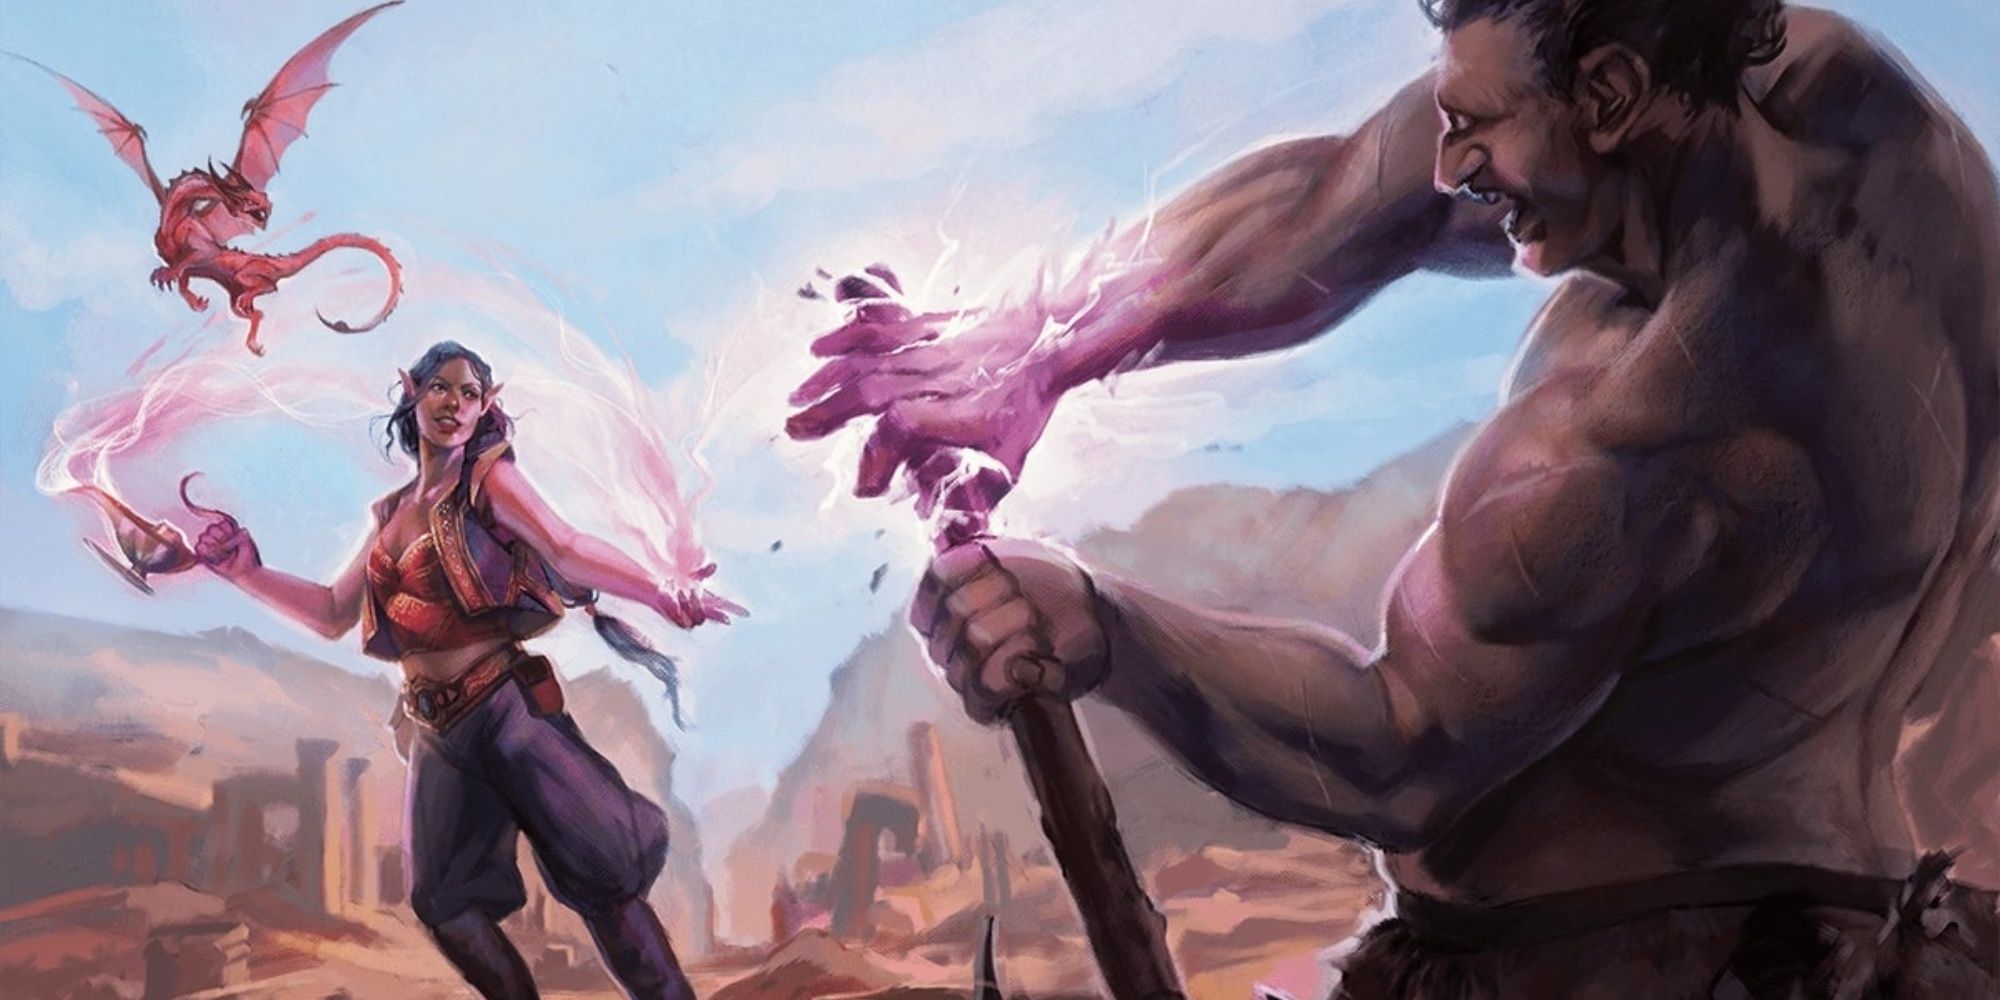 Elven warlock with a Genie patron fighting an orc in Dungeons & Dragons